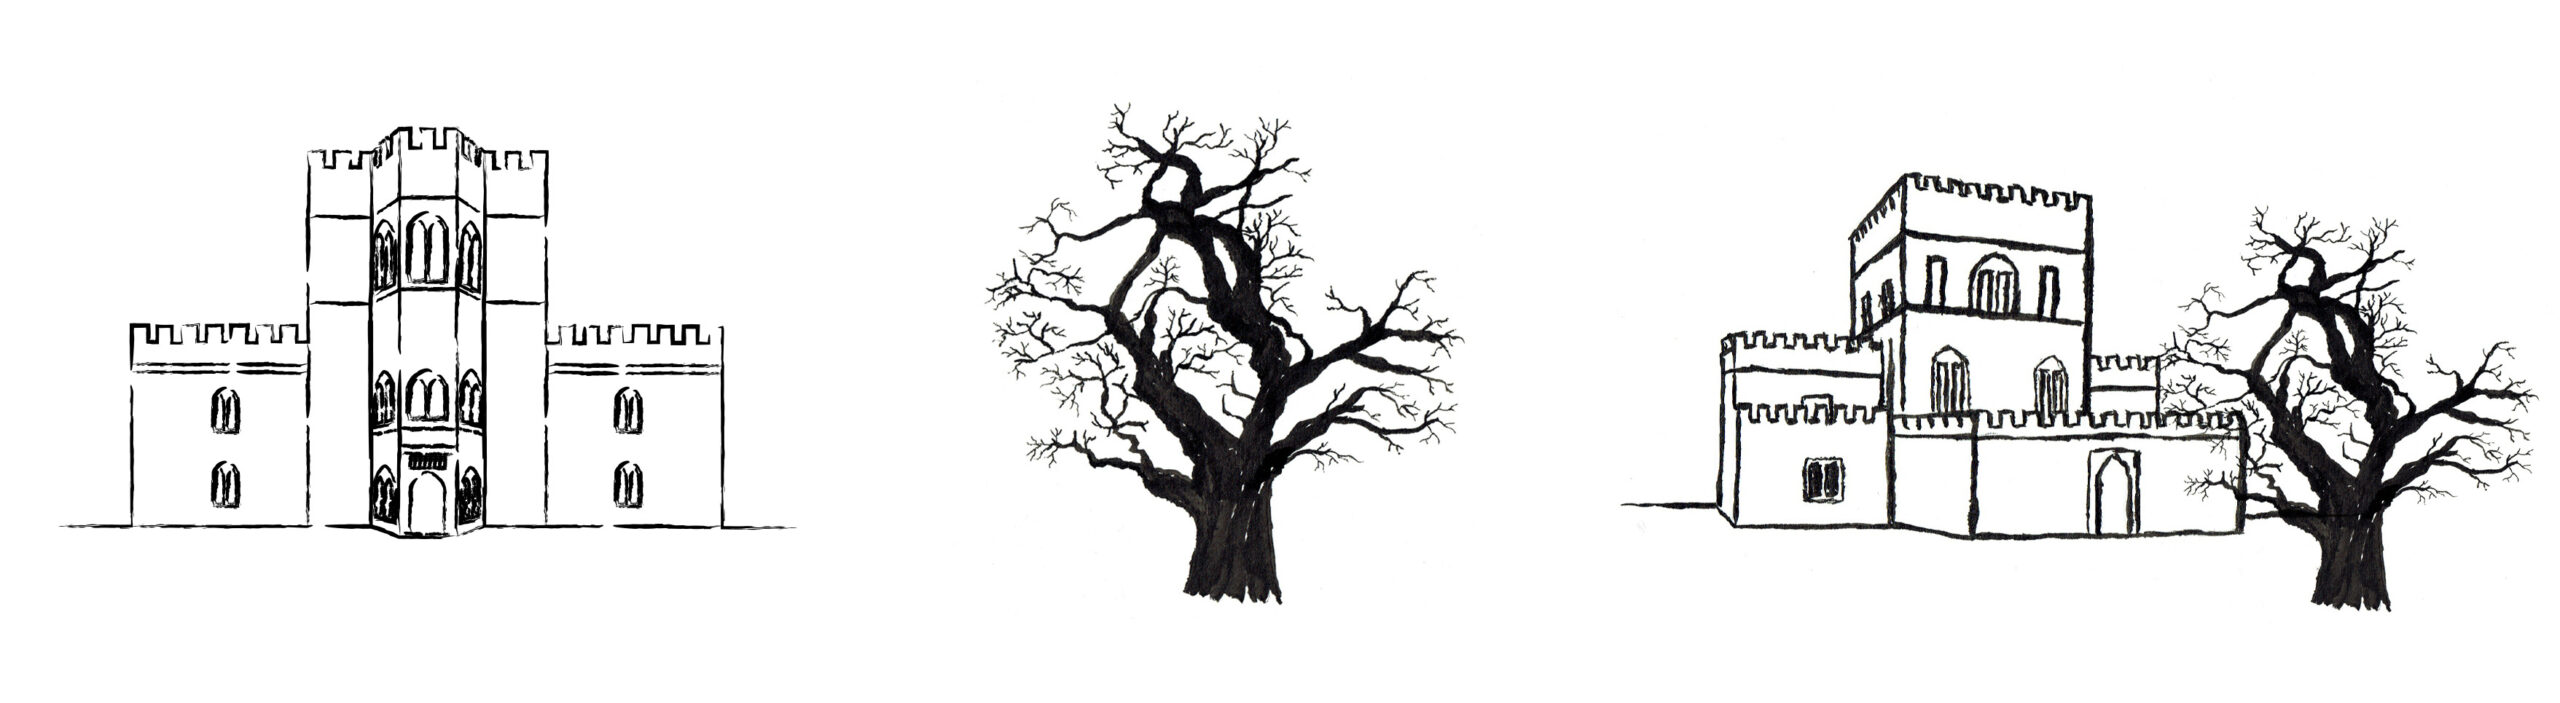 TheLodge_Ink_Tree_2-1